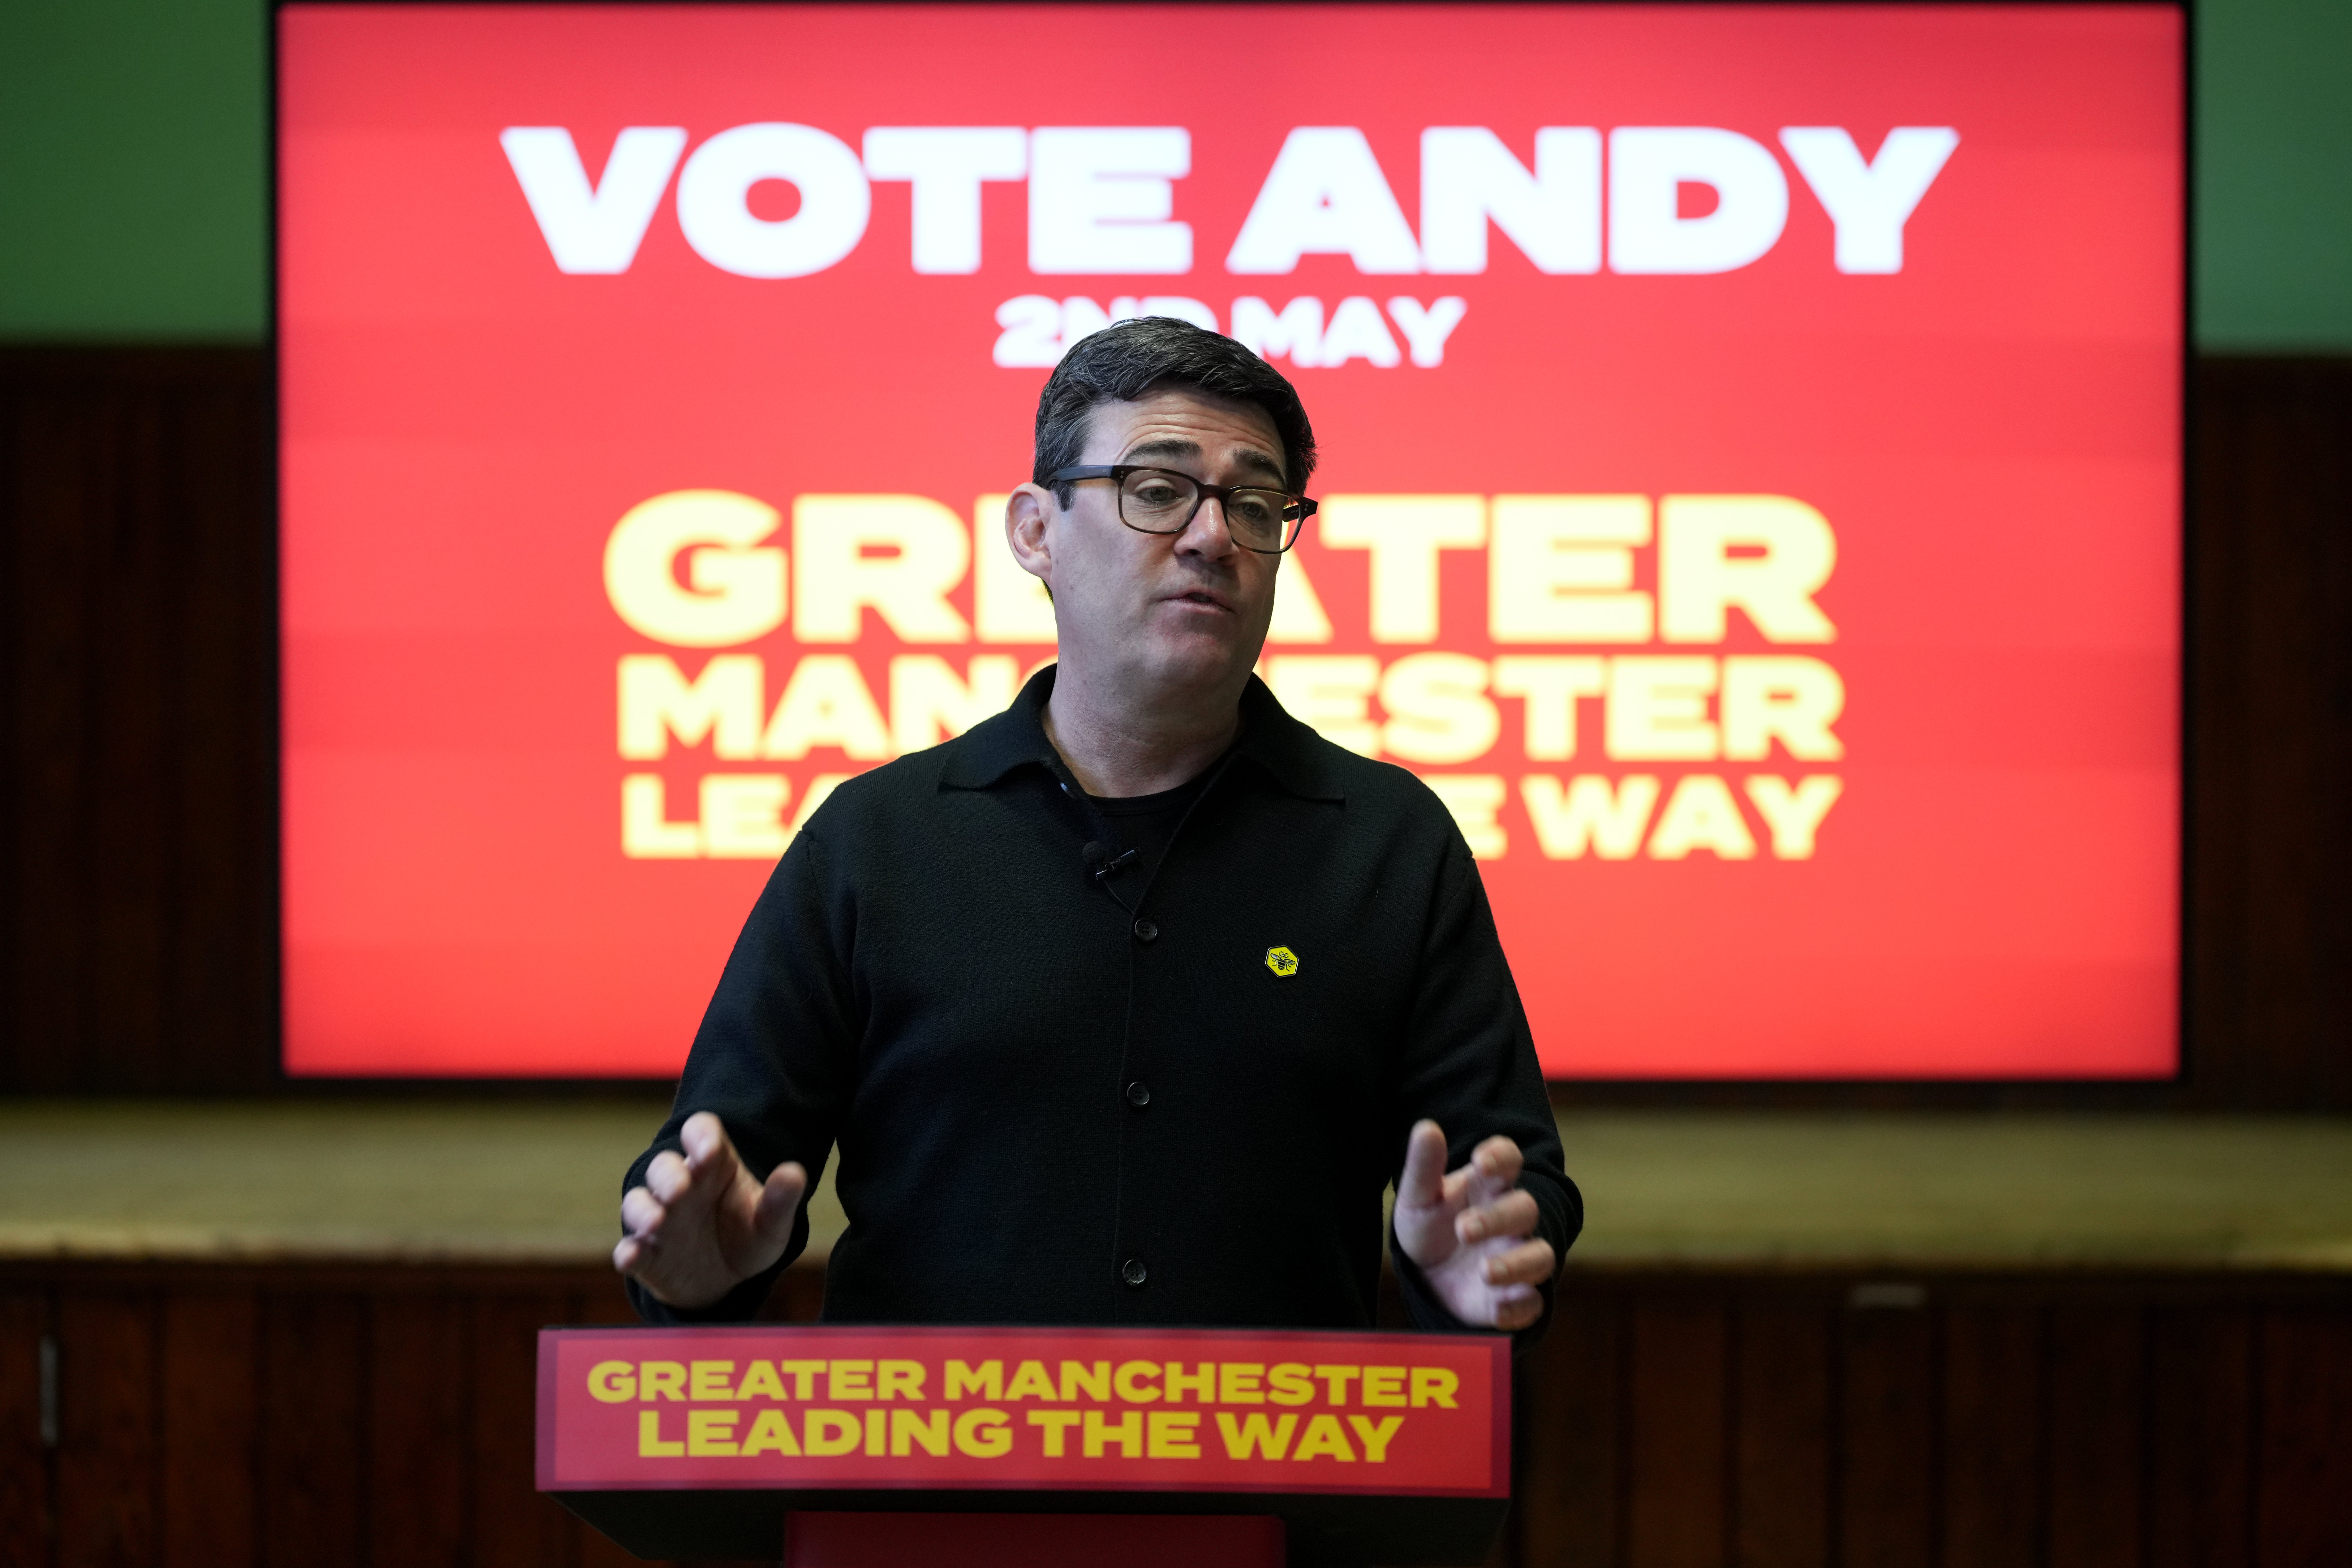 Andy Burnham won a third successive term as the mayor of Greater Manchester with more votes than all his opponents combined